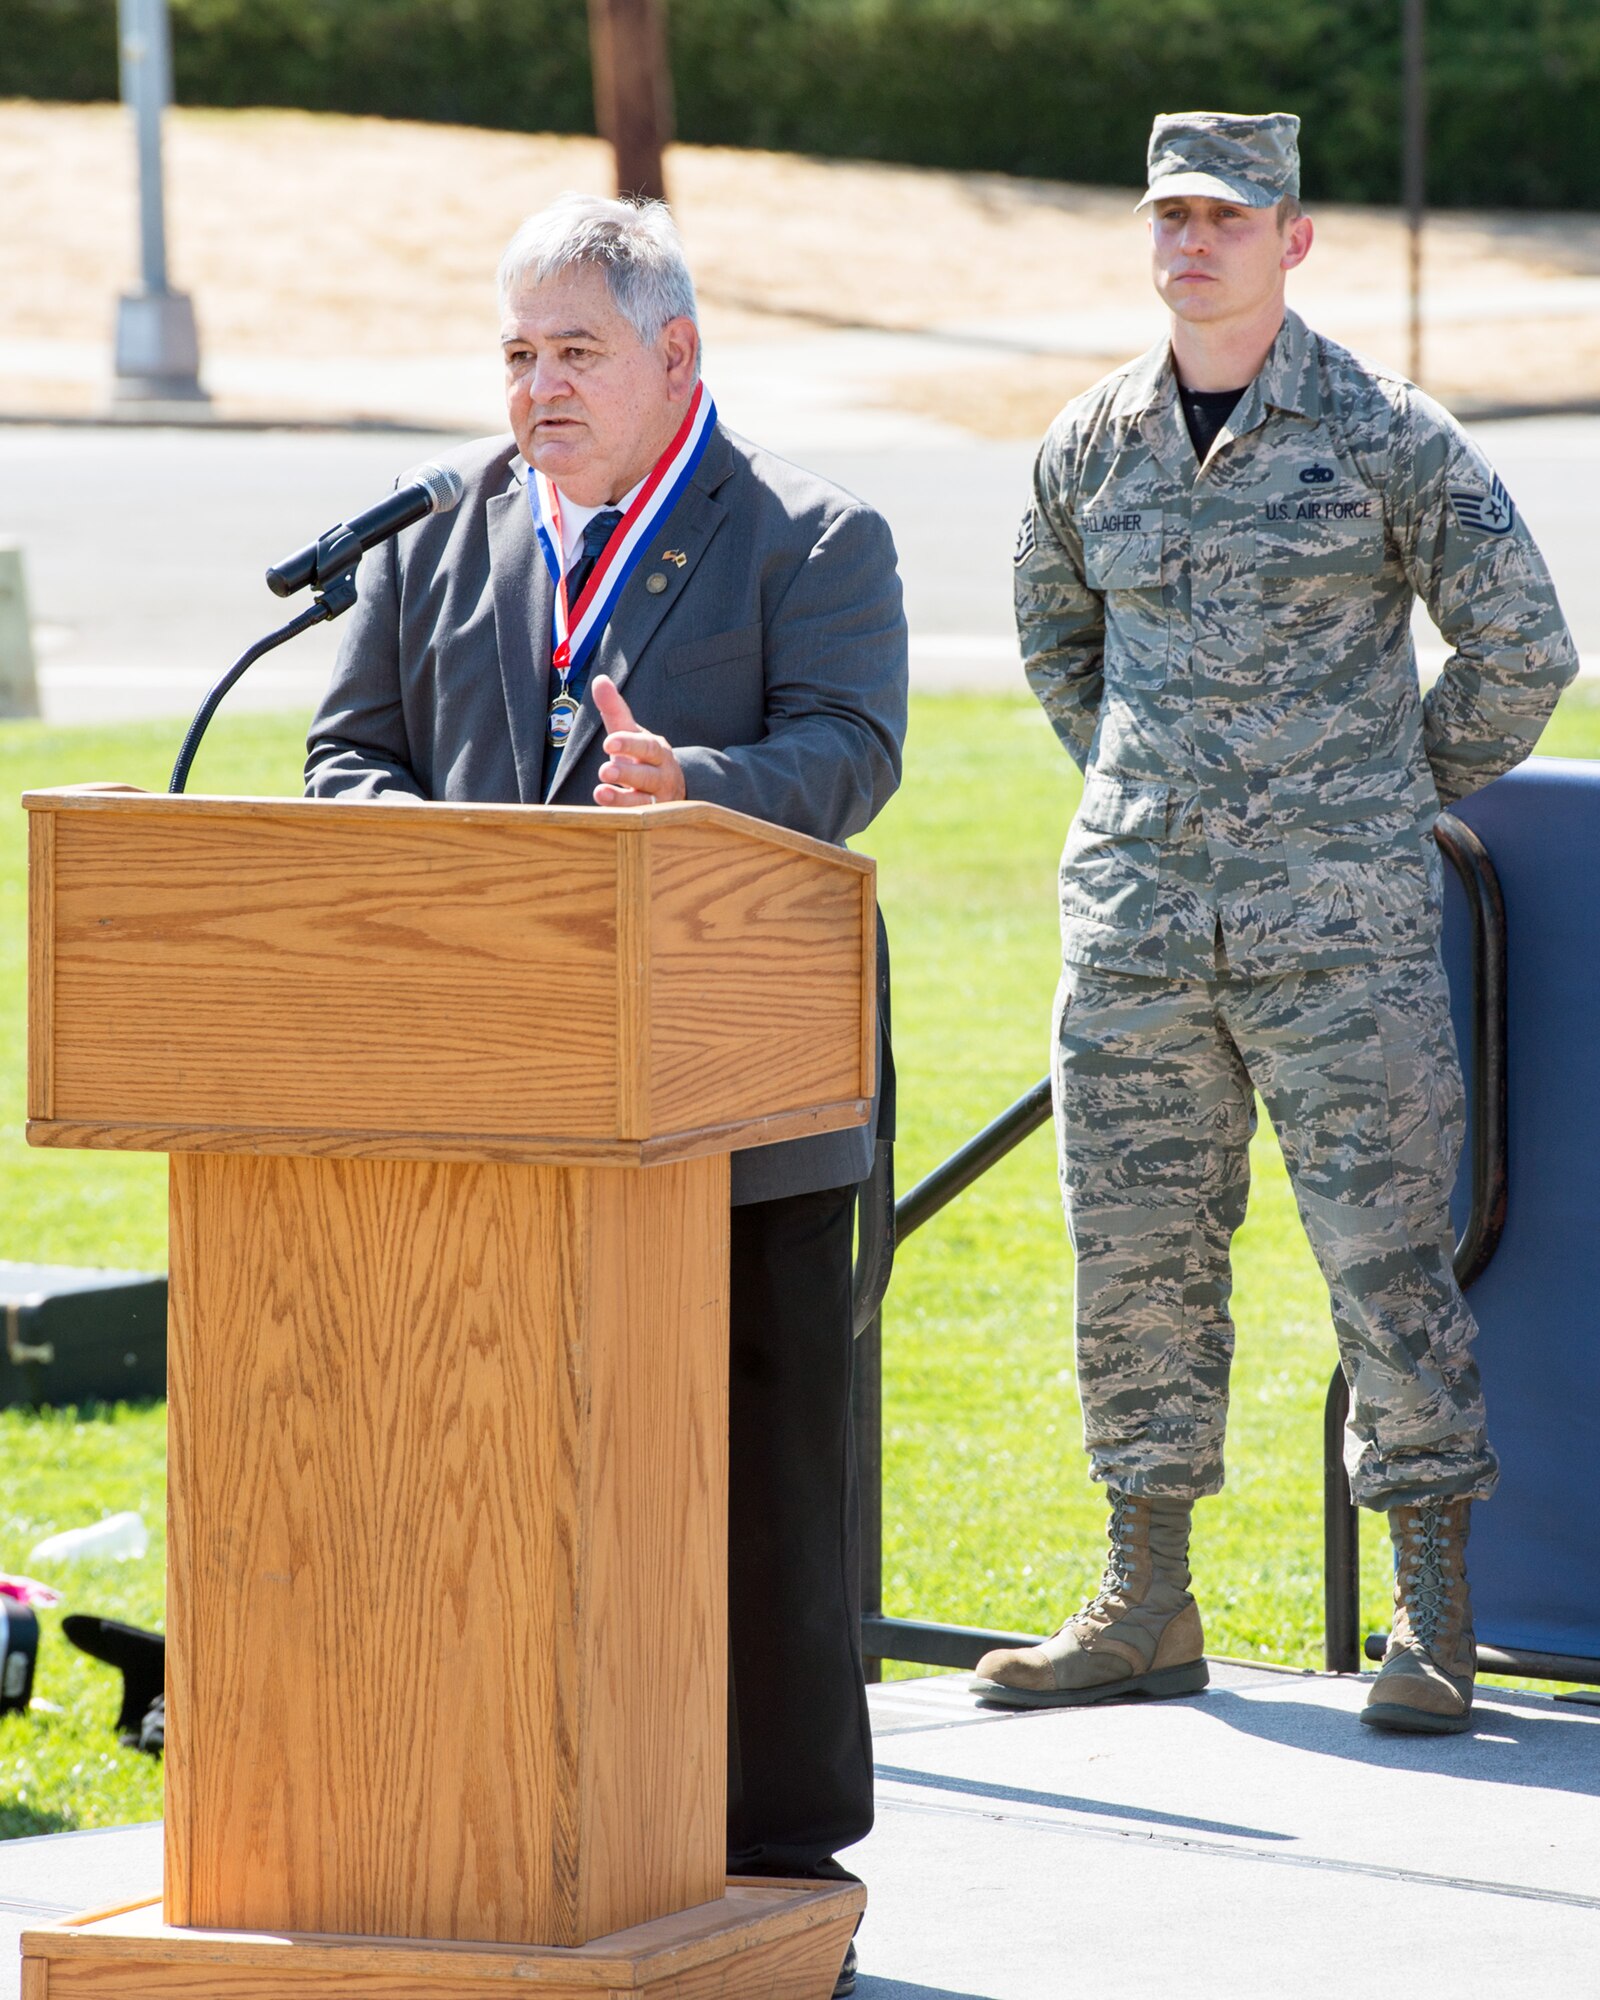 Former Prisoner of War Mike O’Connor provides remarks during the POW/MIA Remembrance Ceremony at Travis Air Force Base, Calif., Sept. 16, 2016. The ceremony was held in honor of POW/MIA Recognition Day which honors former prisoners of war and the more than 83,000 American troops missing in action since WW II. (U.S. Air Force photo by Louis Briscese)